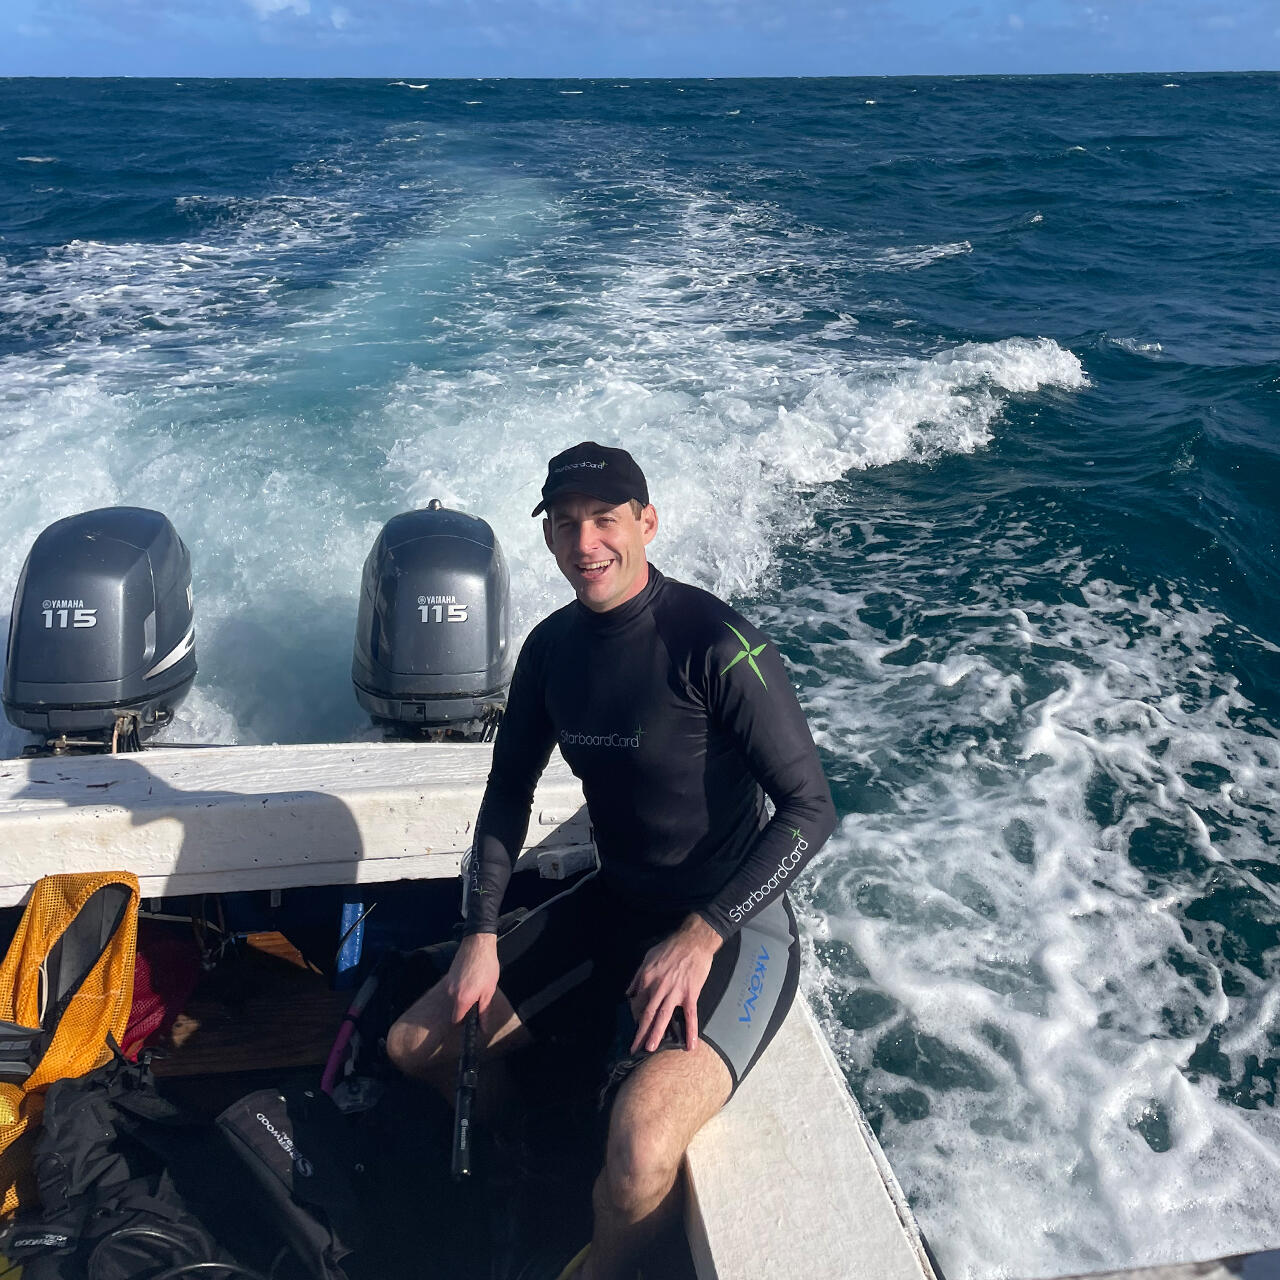 Jon Slator out with the EMC onboard their dive boat.